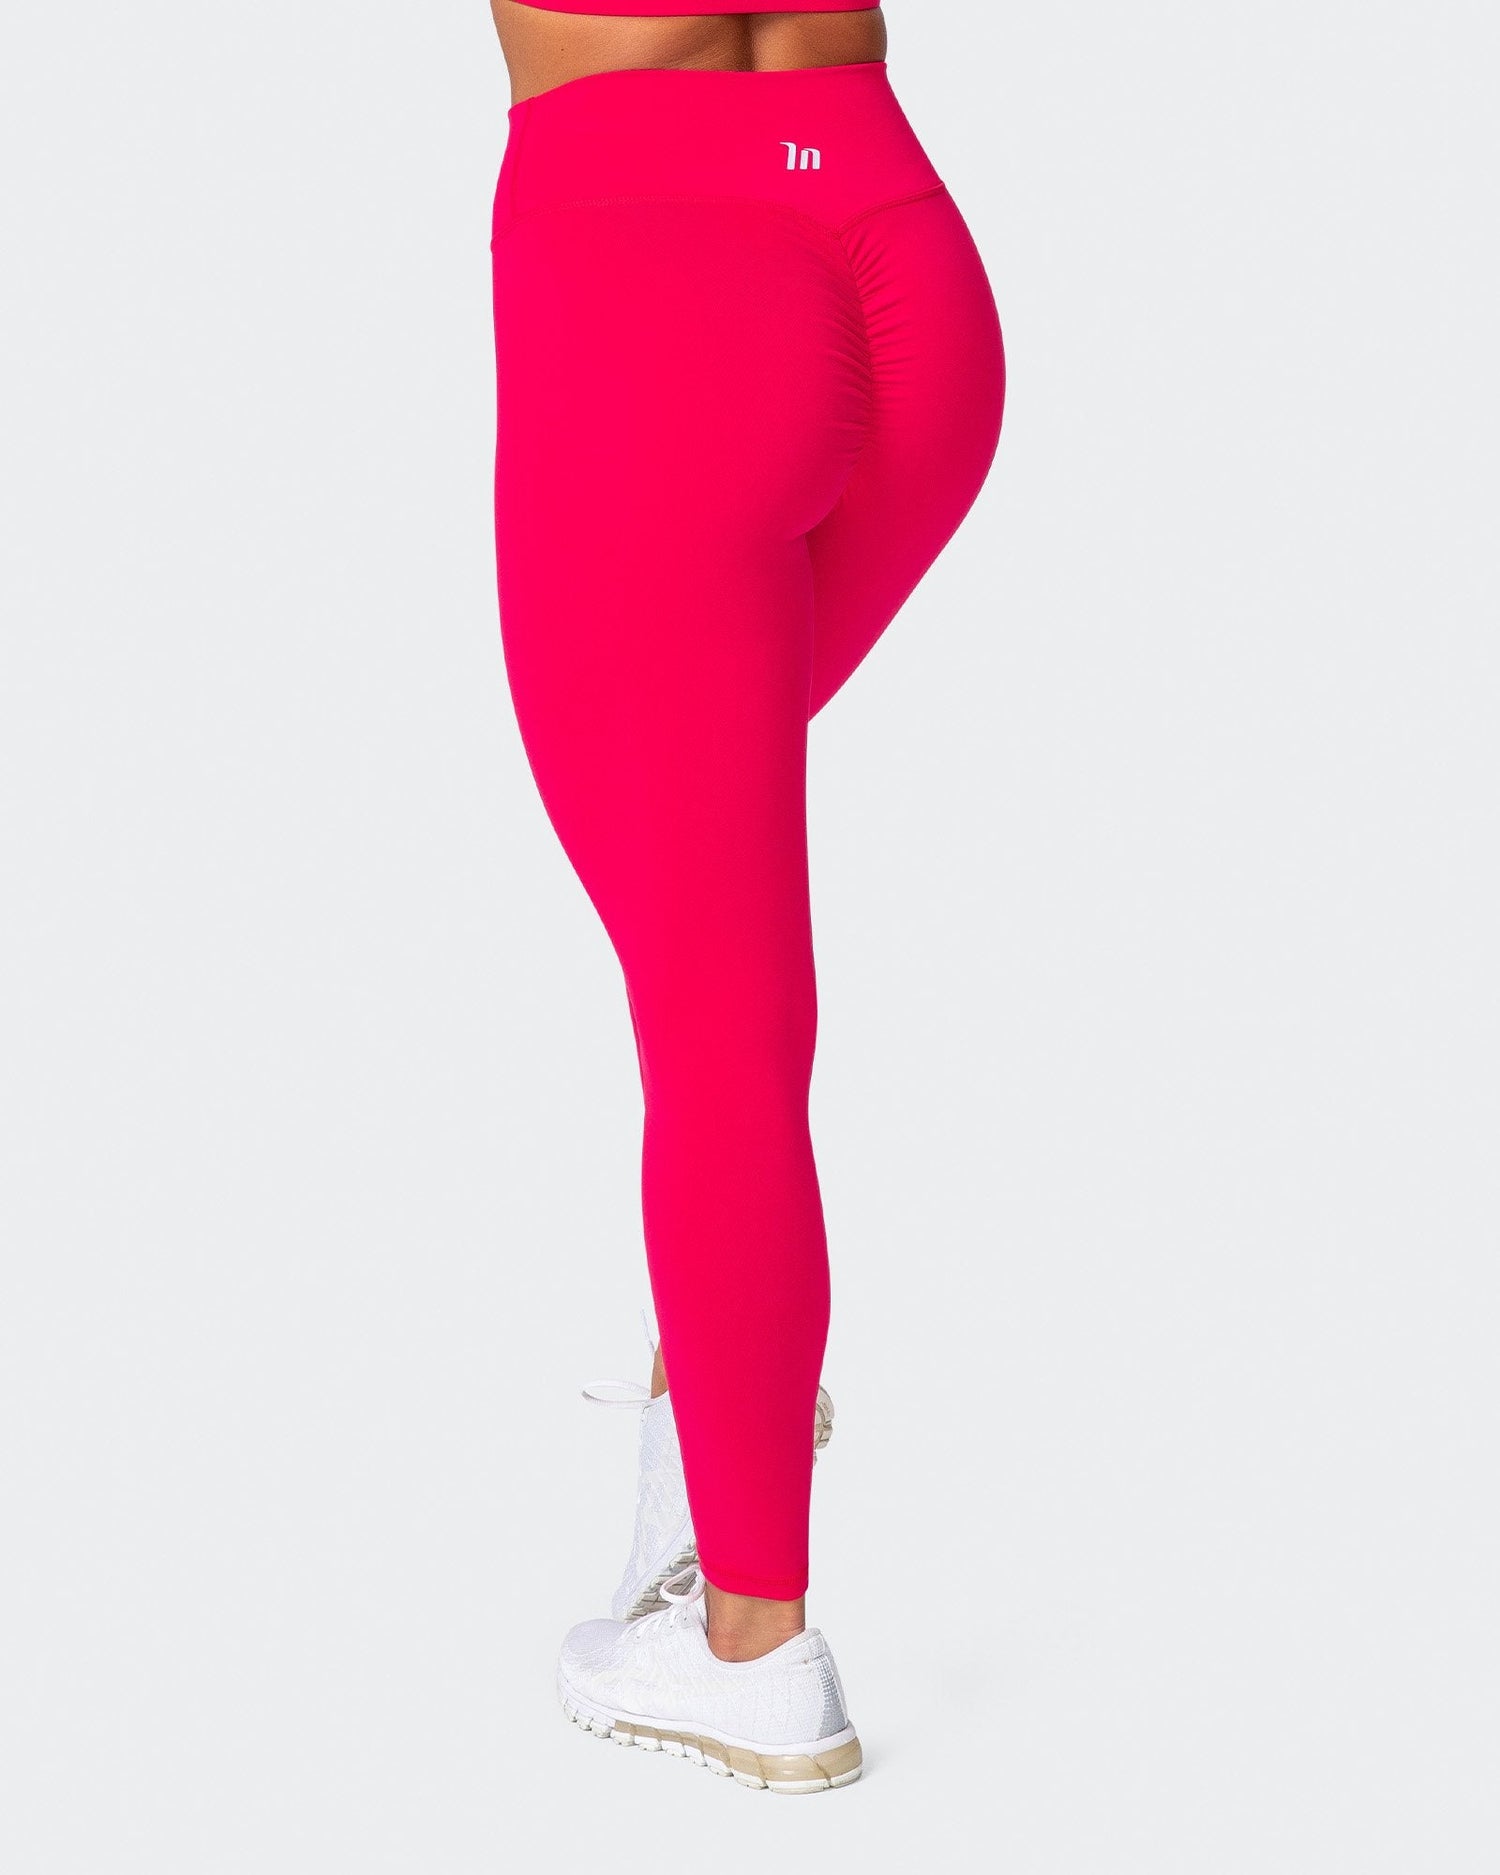 High Waisted Leggings Never Give Up – Pink - Rise Sport